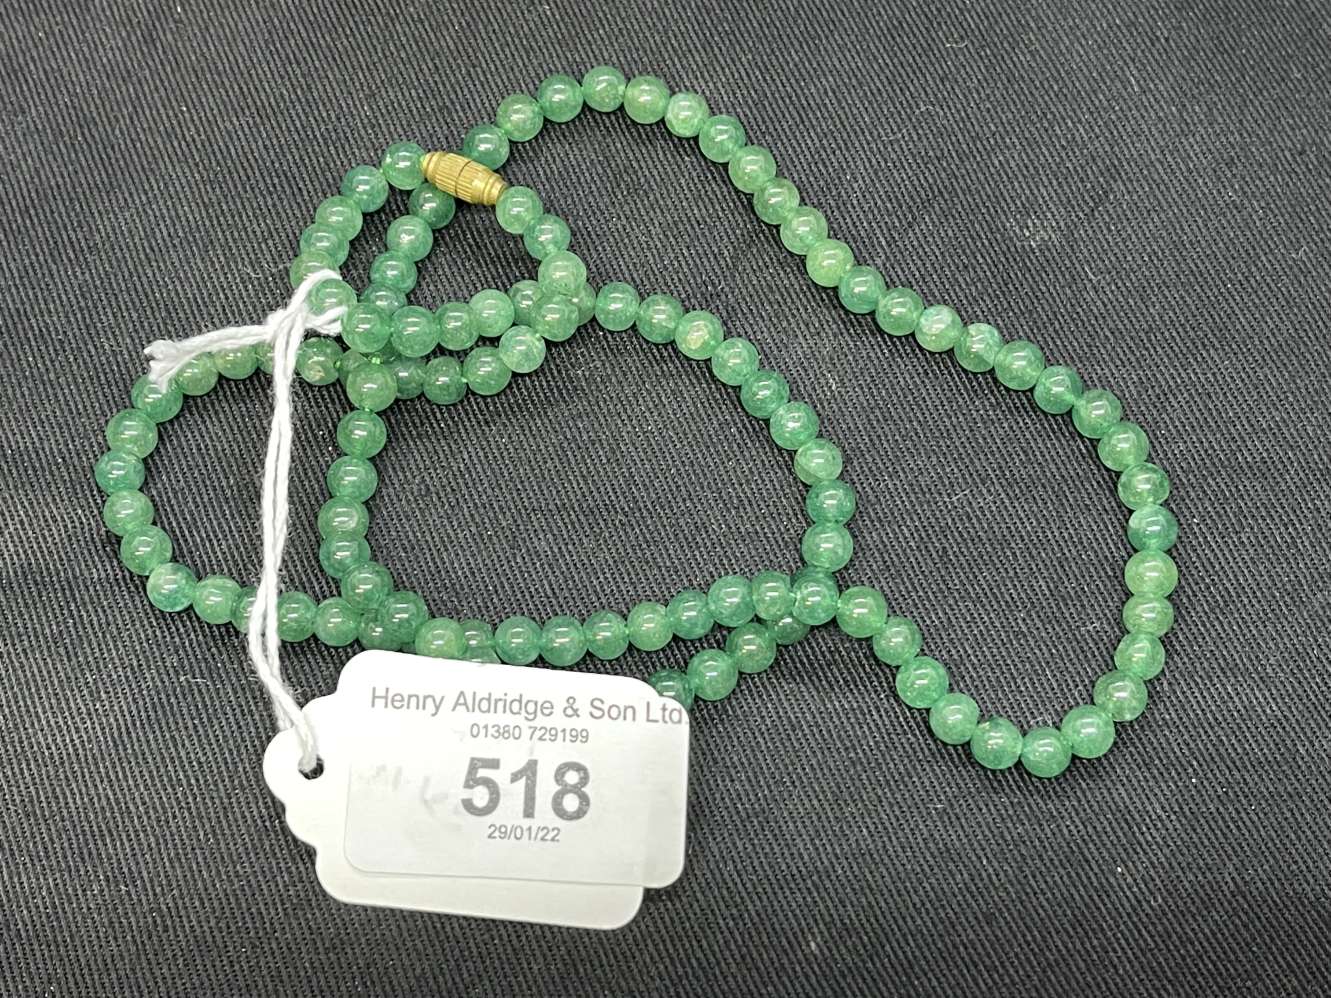 Jewellery: Necklet of (110) 5.5mm. to 6mm. Jade beads.